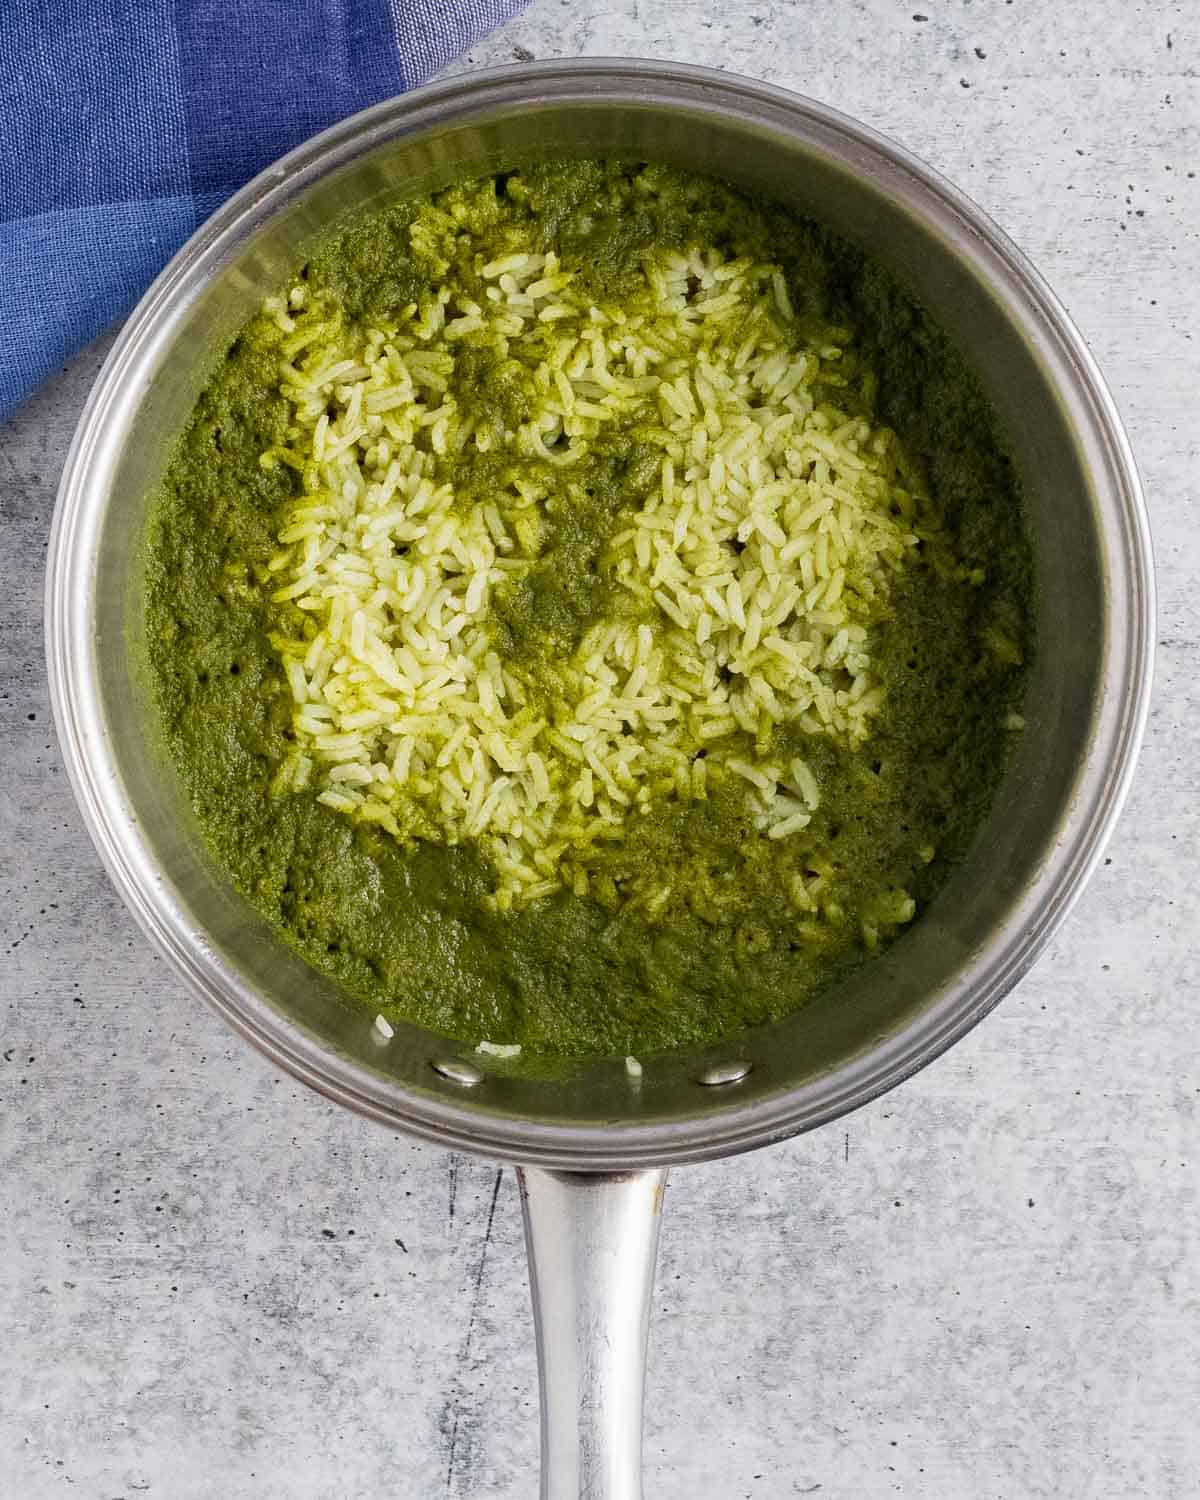 Cooked green rice in a saucepan before fluffing.